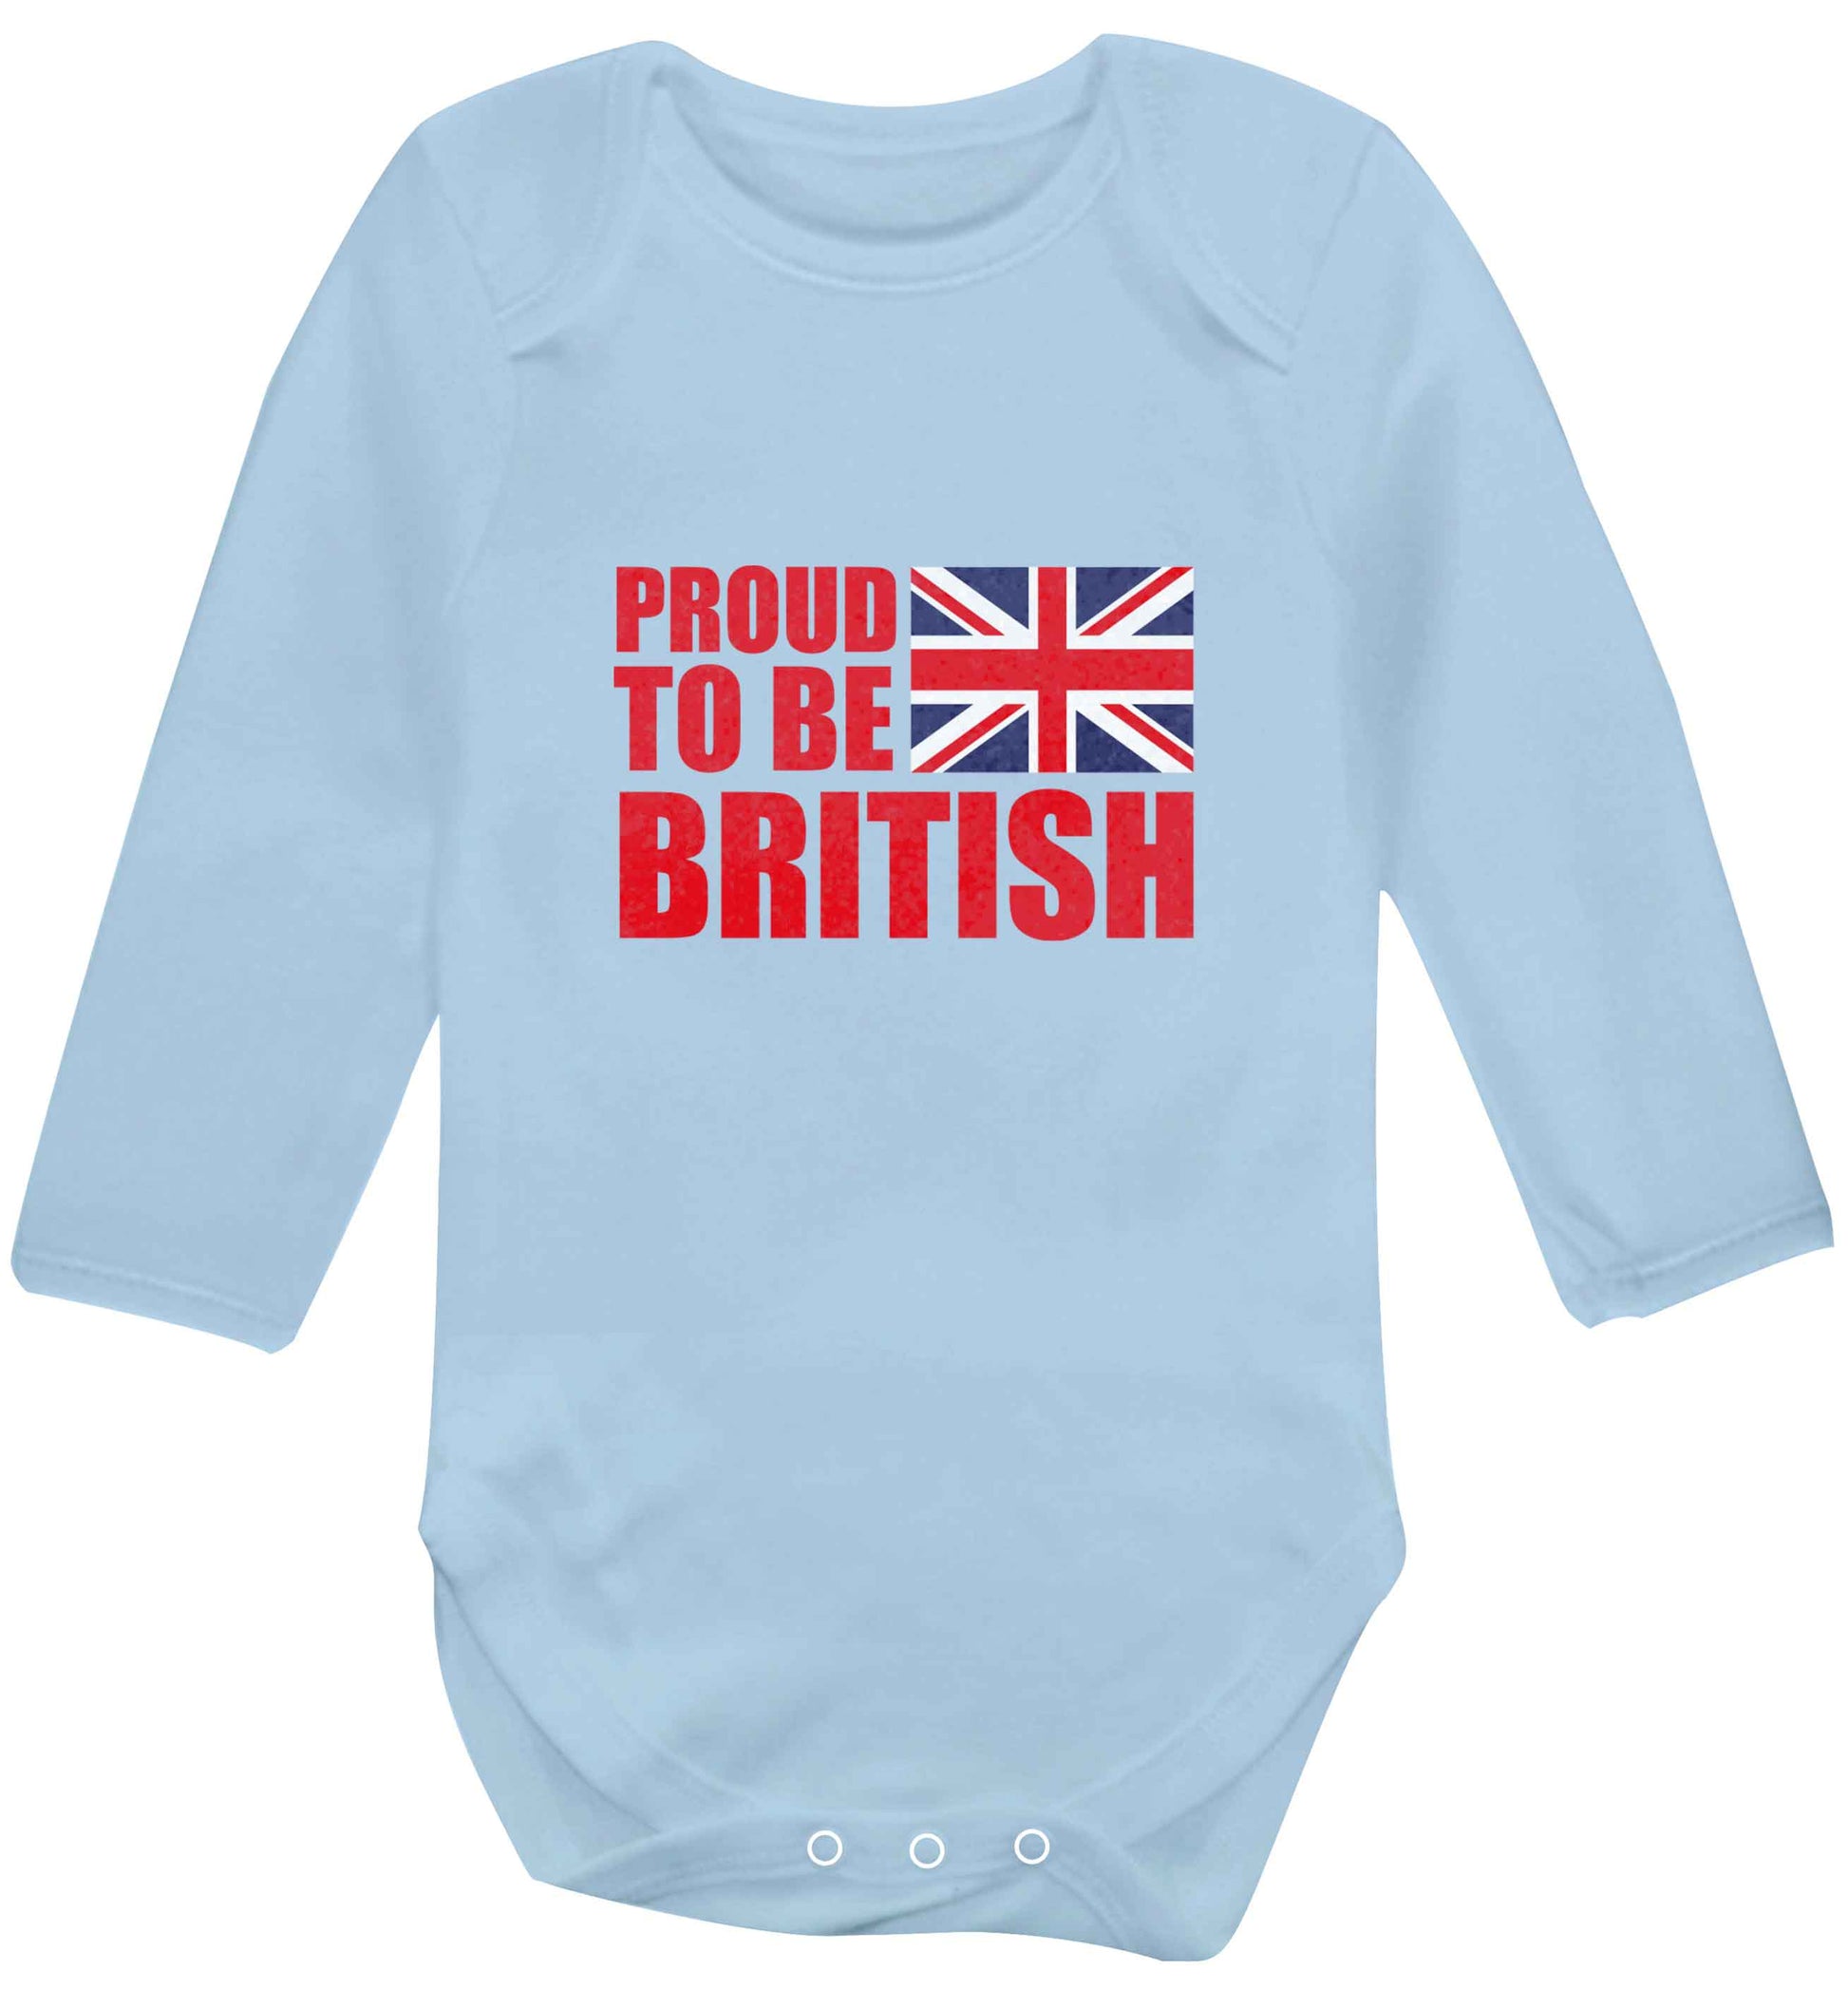 Proud to be British baby vest long sleeved pale blue 6-12 months